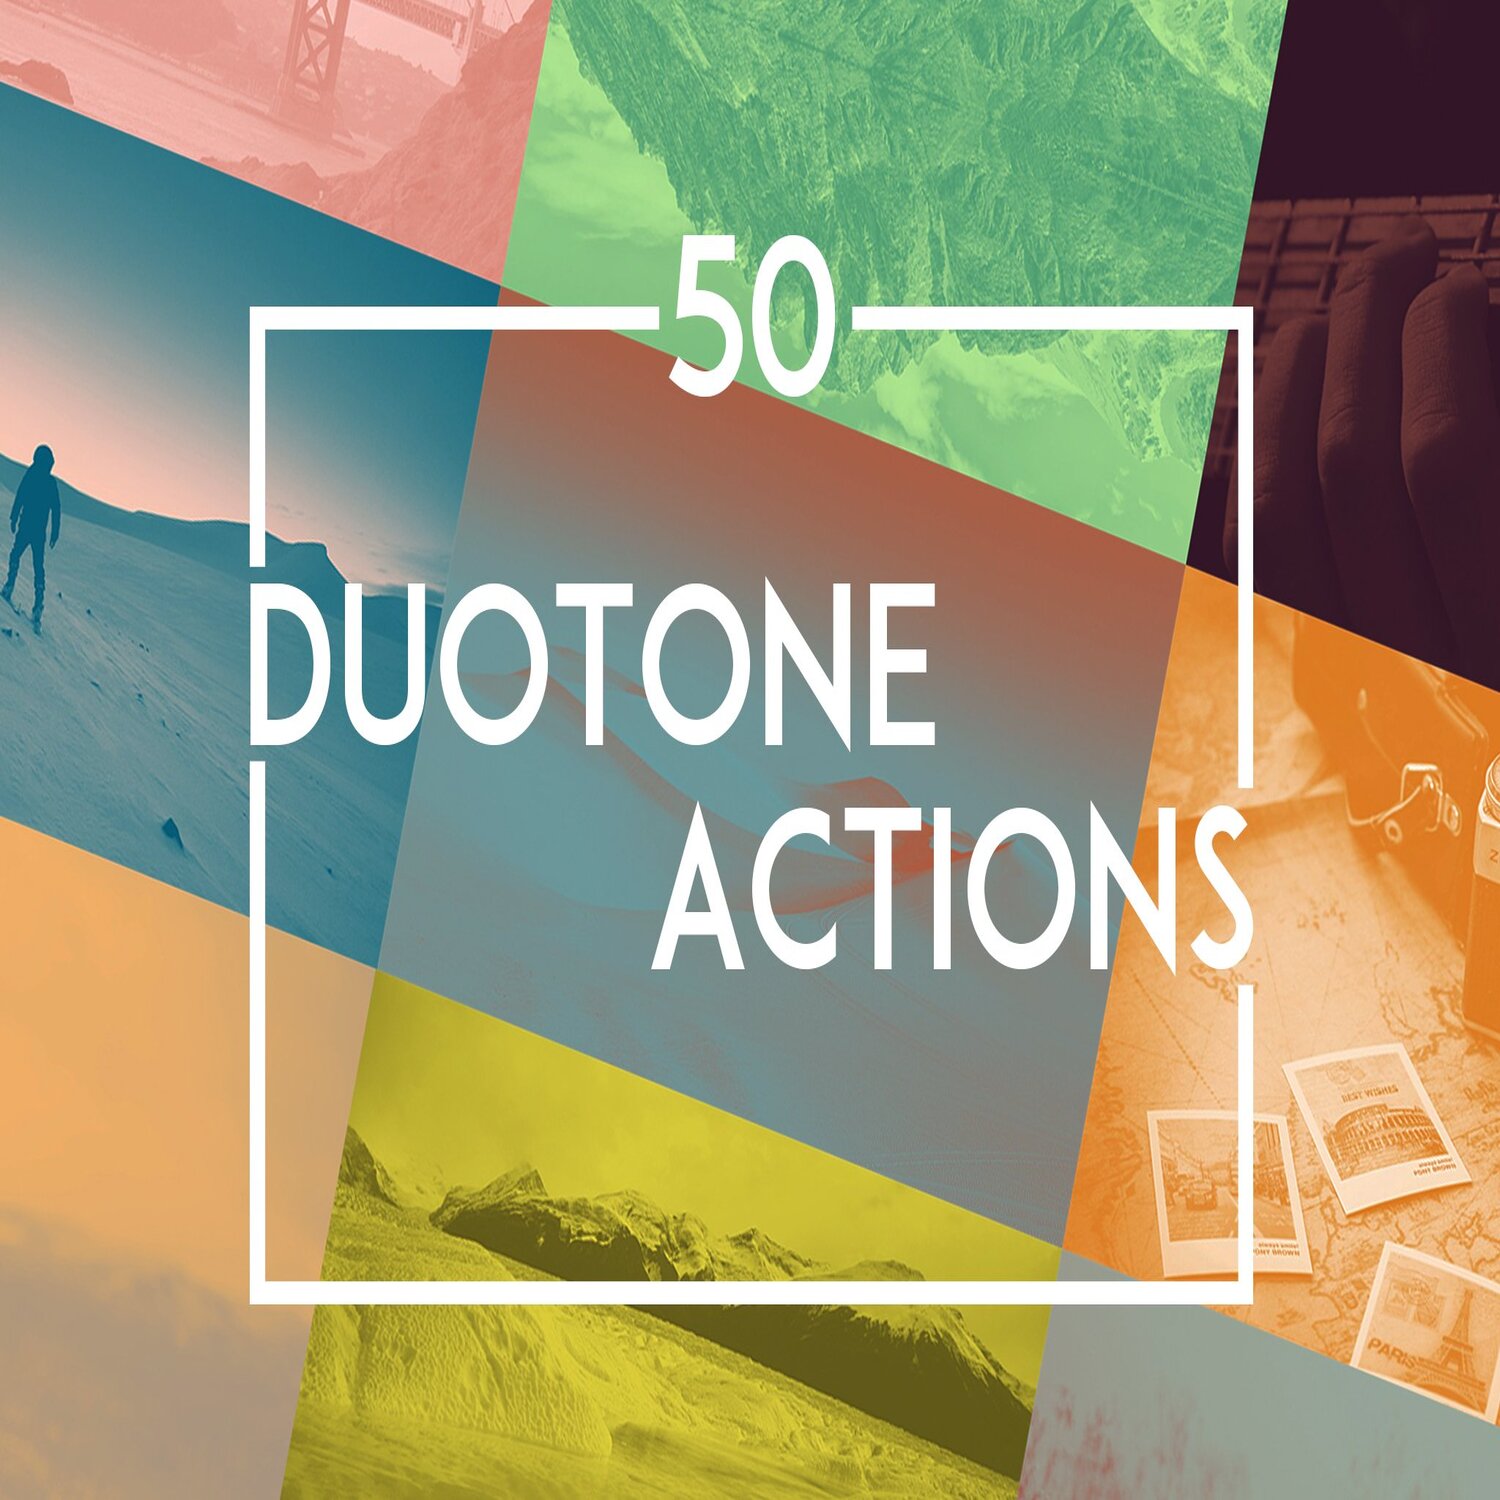 50 Duotone Actions cover.